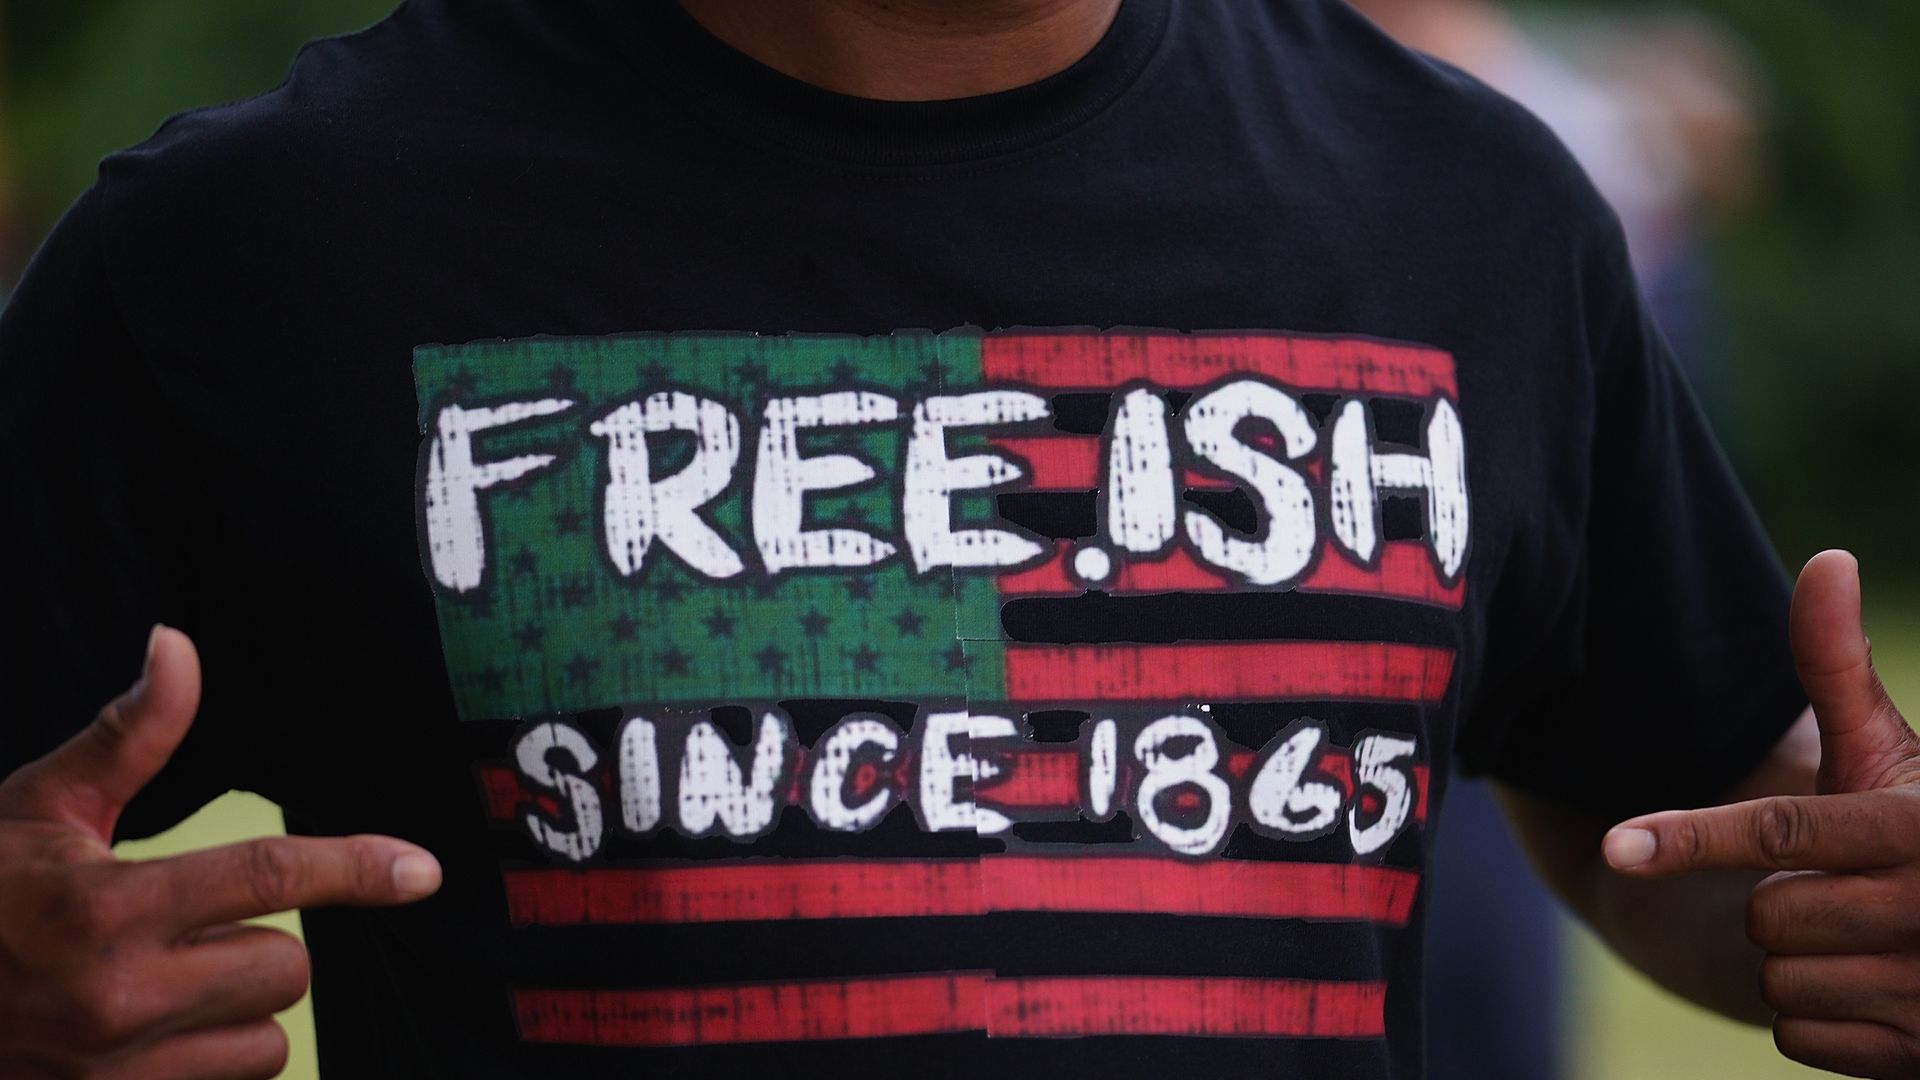  A man displays a shirt celebrating the freedom of enslaved Black people during the Juneteenth celebration on June 19, 2020 in Tulsa, Okla.